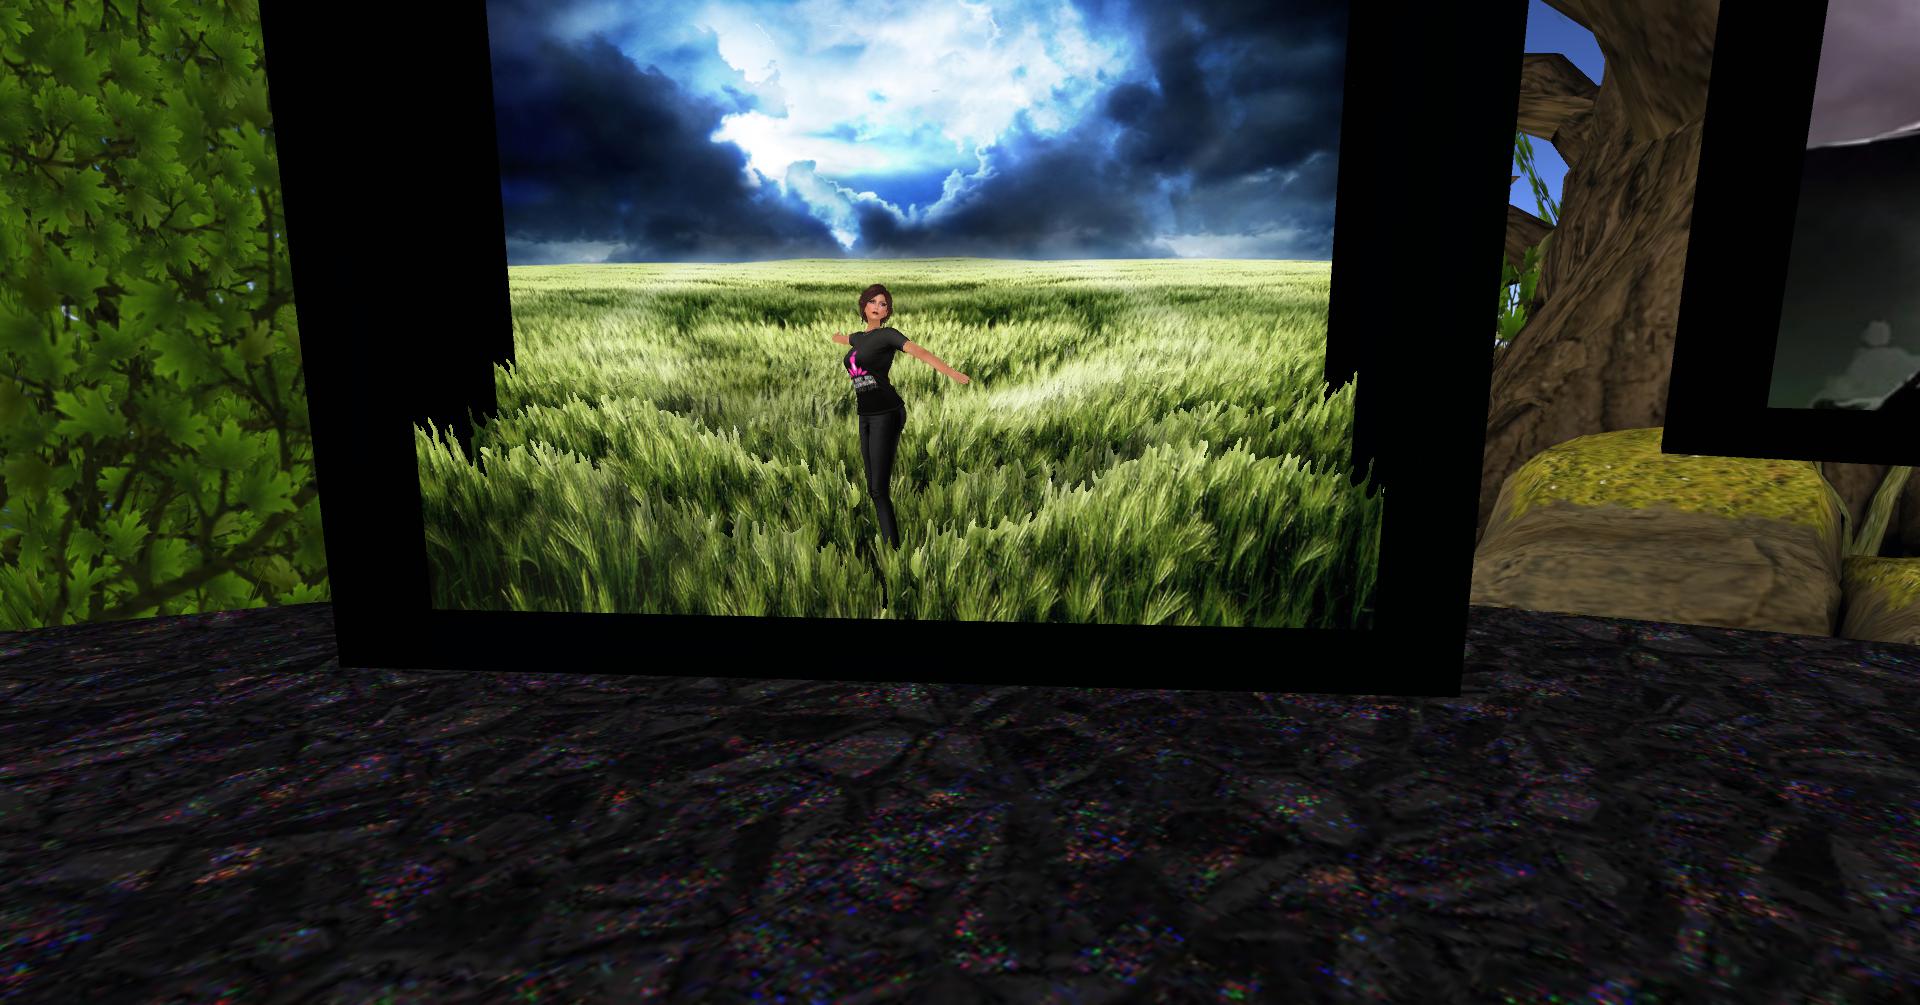 This one is so joyful! You can't see it here, but this exhibit moves. I am actually dancing around in this field! Fun!